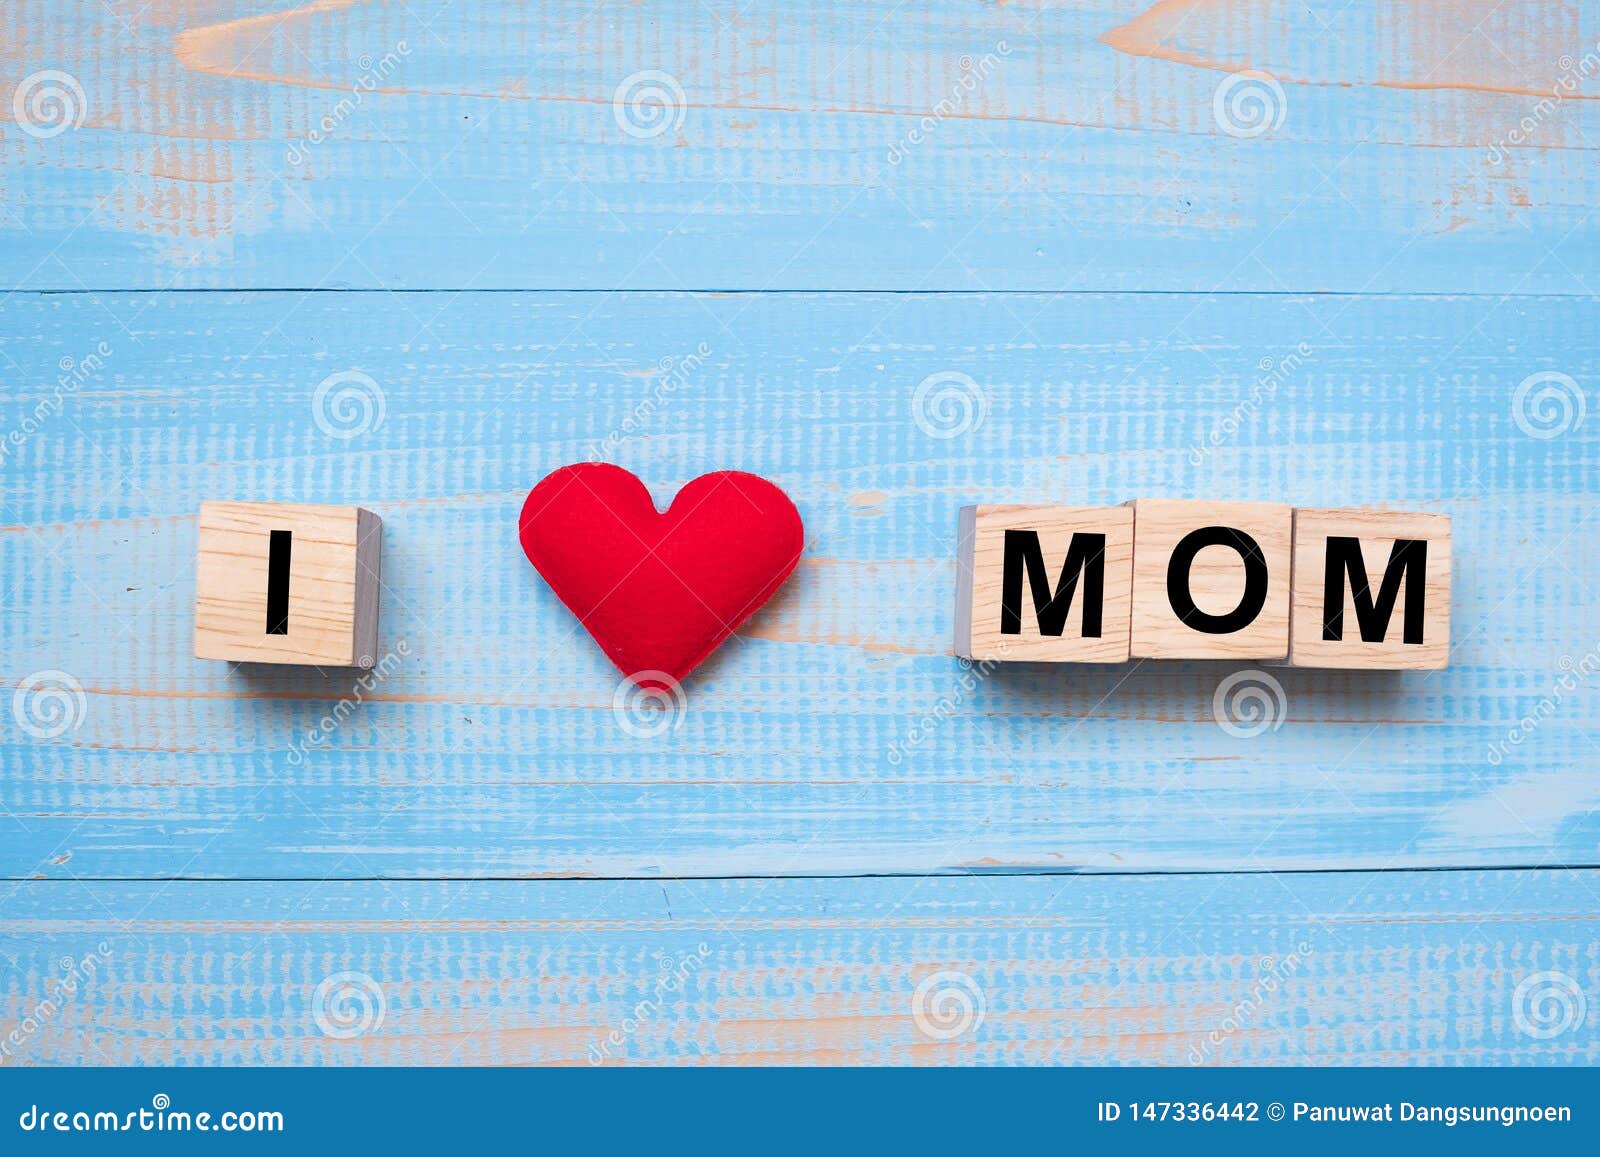 I Love MOM Text with Red Heart Shape on Blue Wooden Background. Happy ...